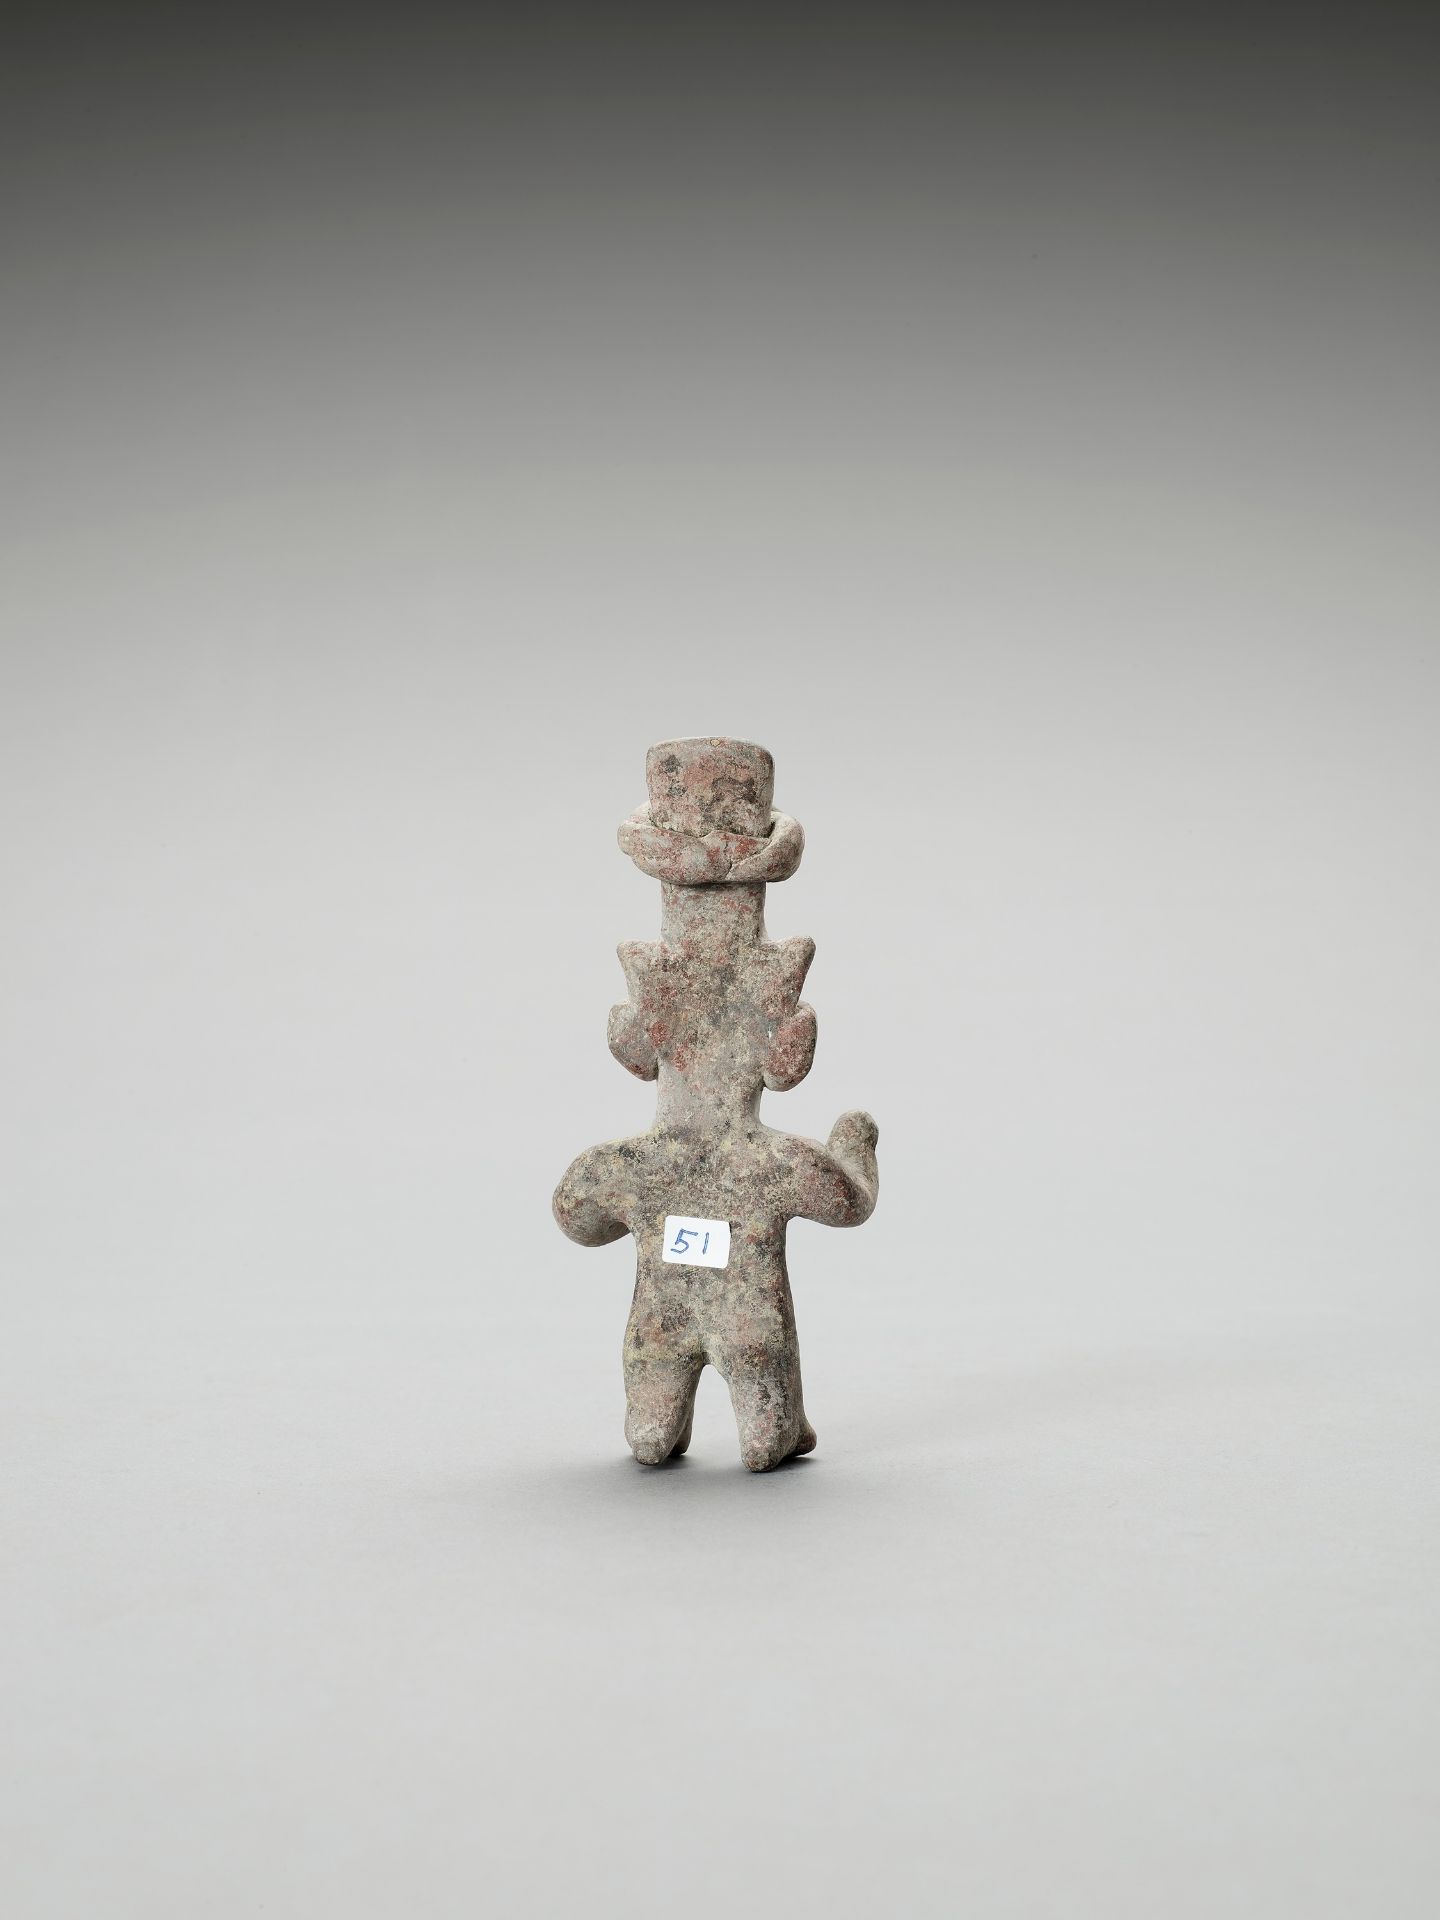 PRE-COLUMBIAN FIGURE OF A CONCERNED MAN - Image 4 of 6